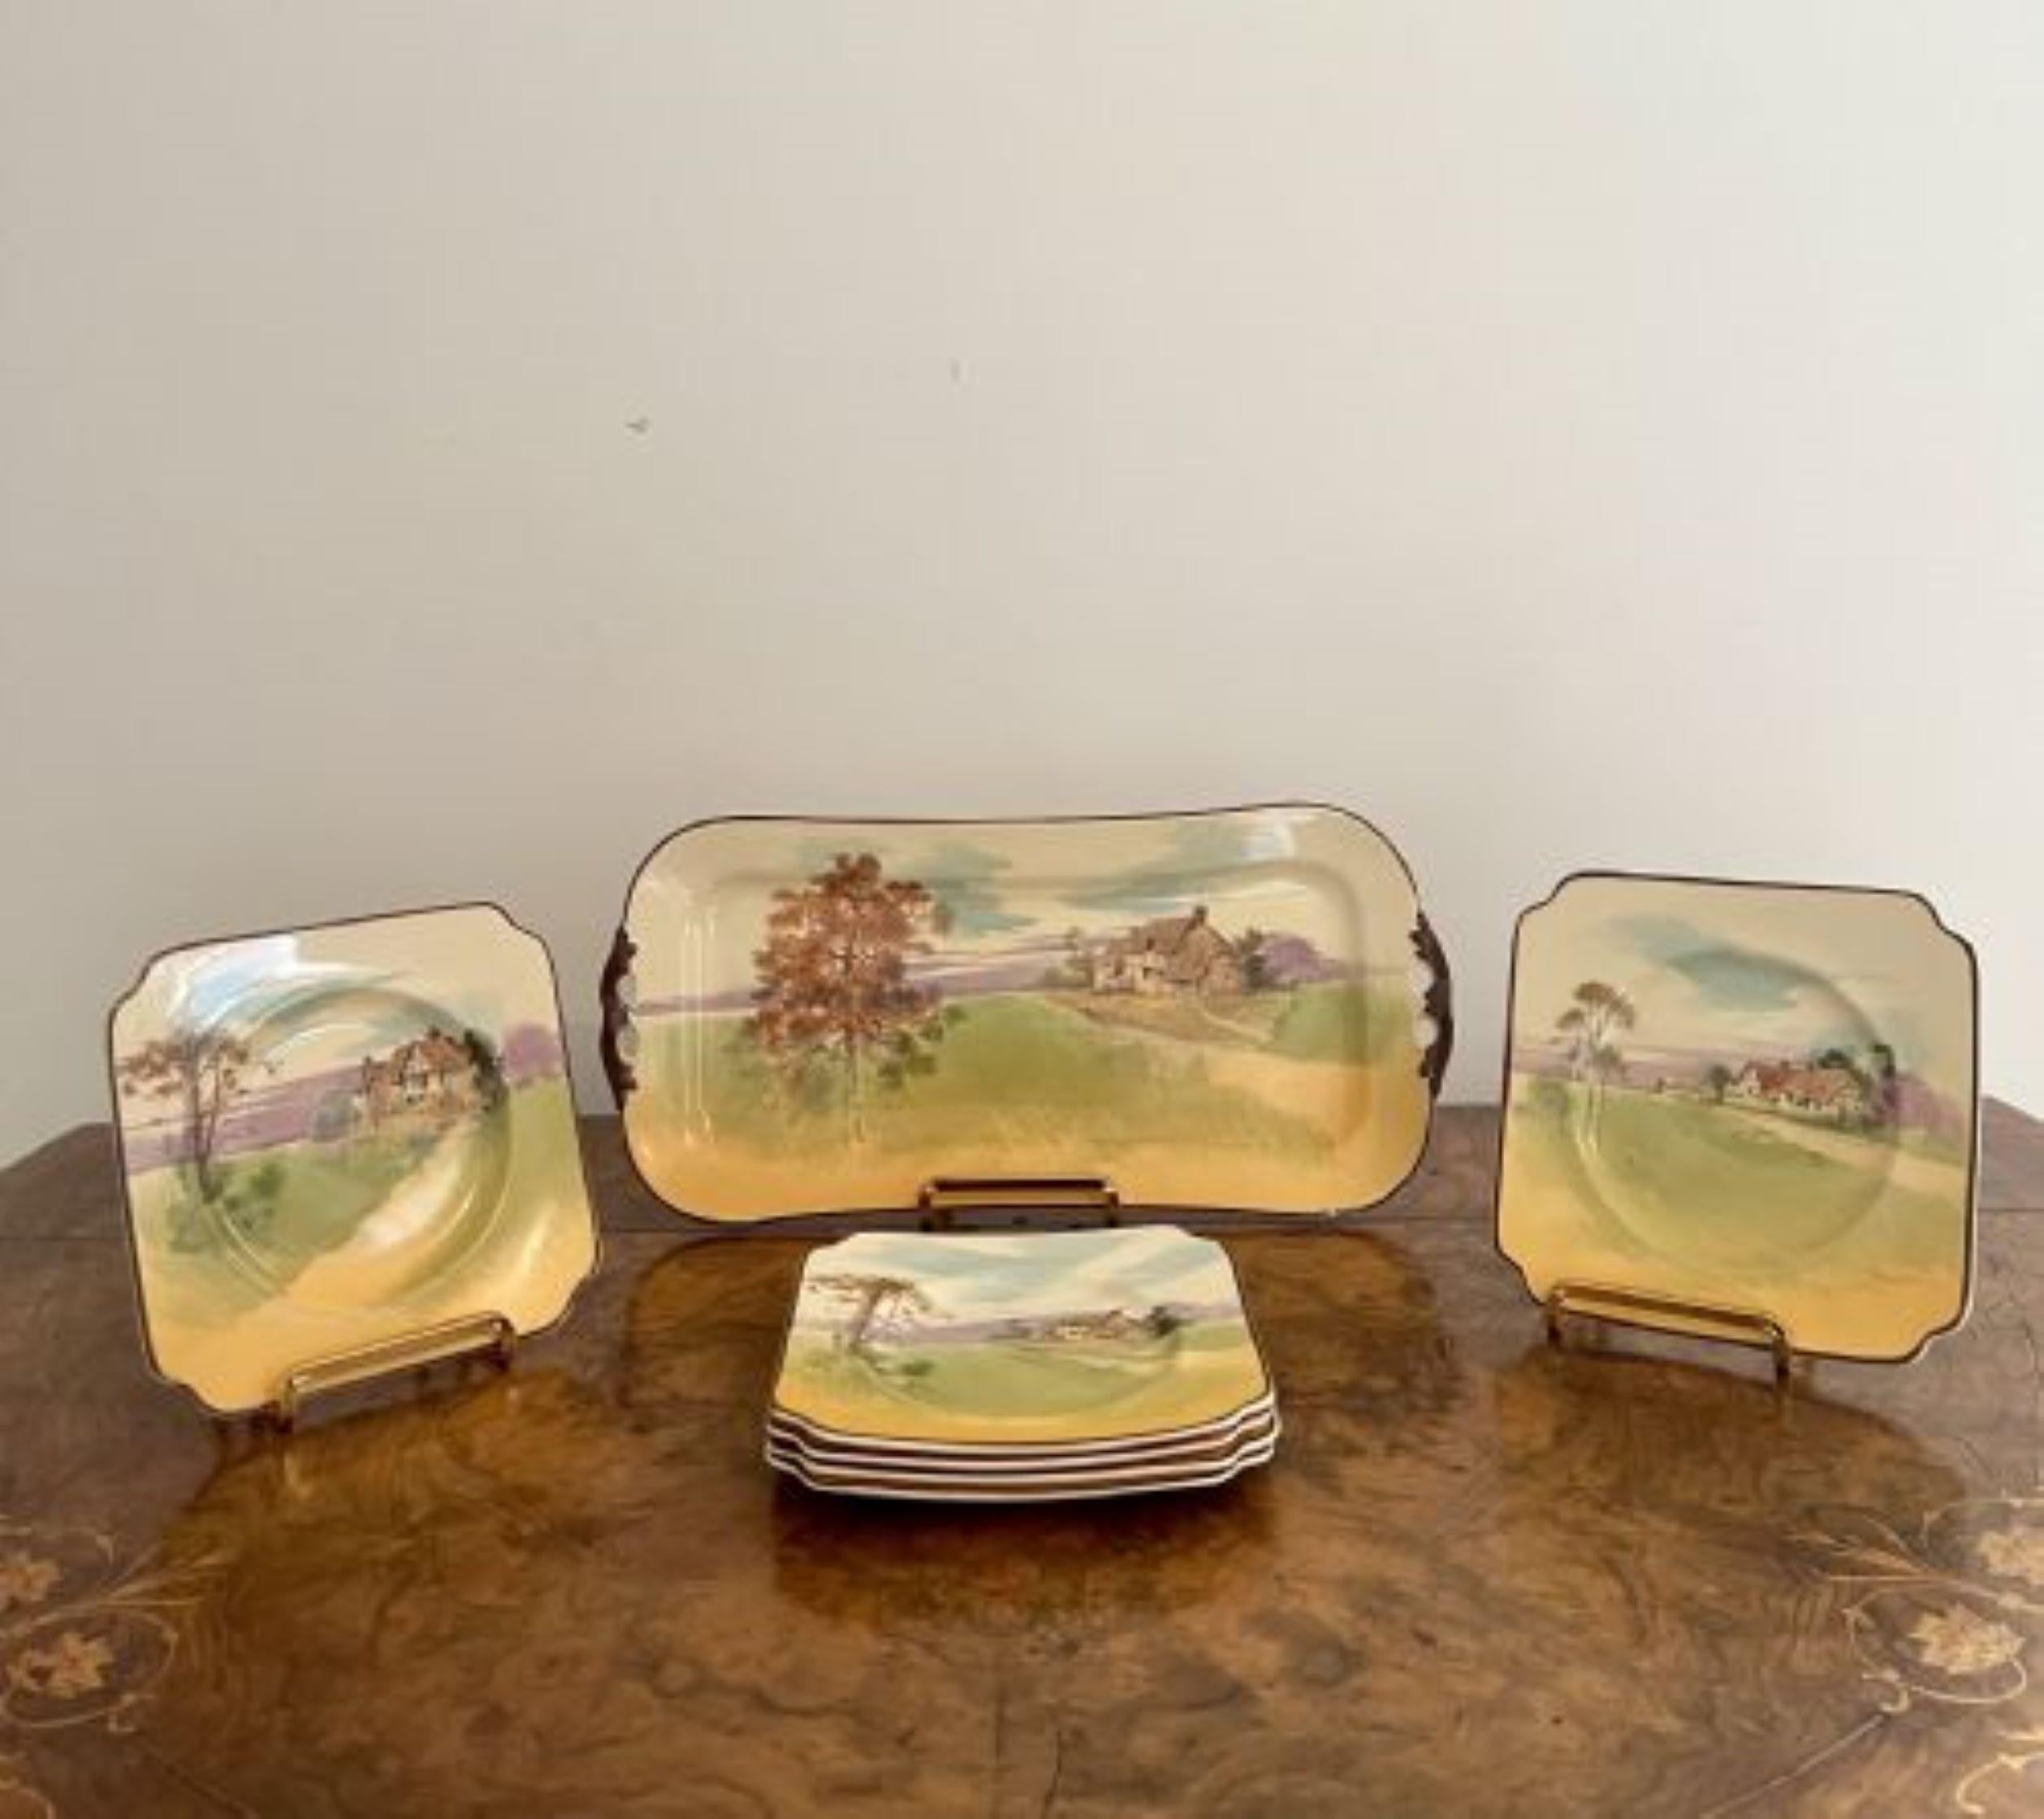 Lovely set of seven antique Royal Doulton sandwich plates having a set of six Royal Doulton plates and a matching large serving plate, decorated with different scenes with old cottages and houses in rural settings hand painted in wonderful yellow,